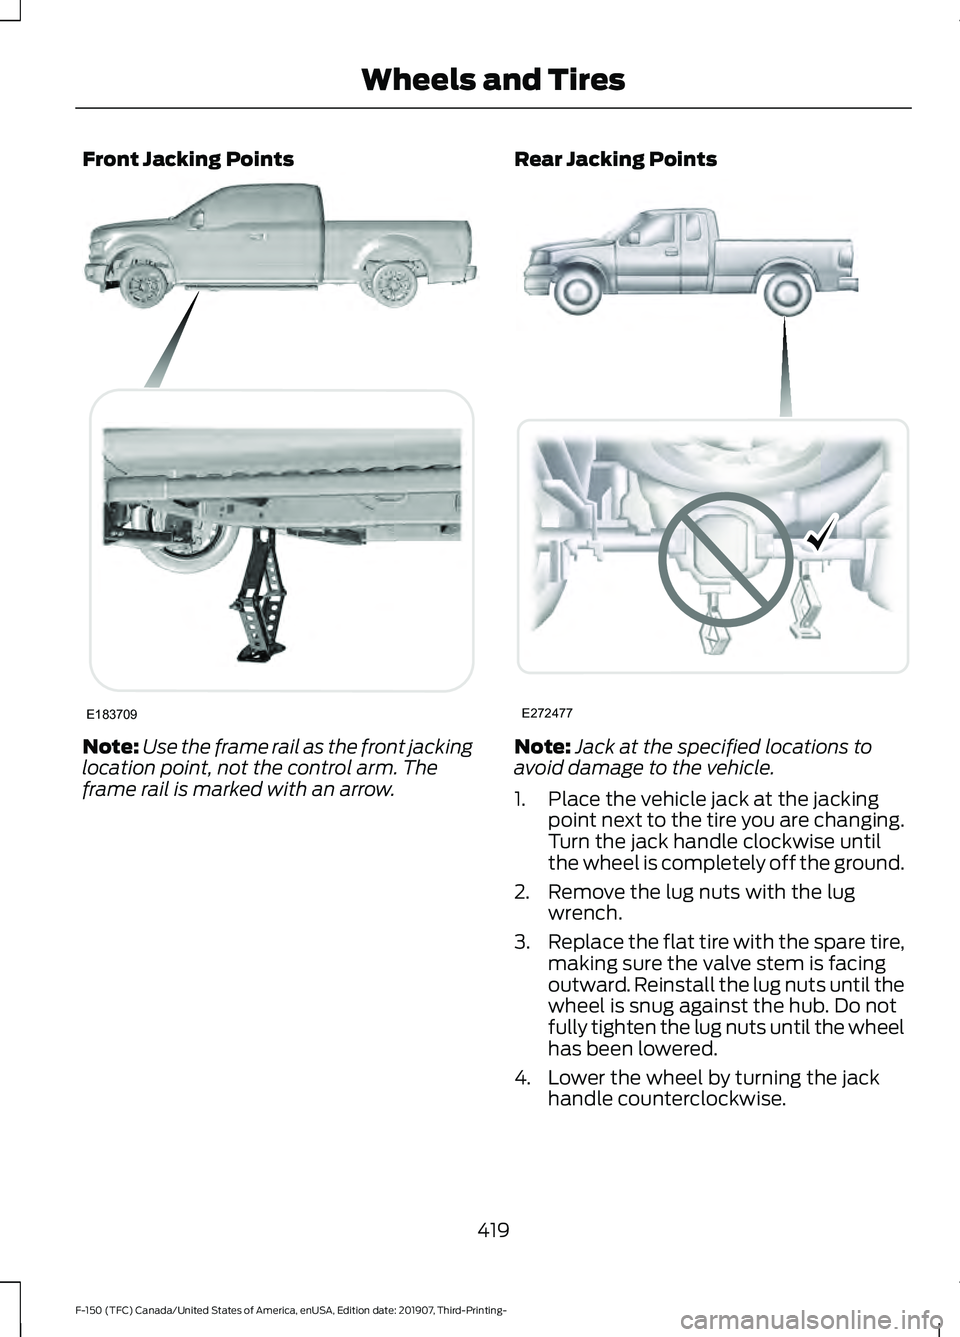 FORD F-150 2020  Owners Manual Front Jacking Points
Note:
Use the frame rail as the front jacking
location point, not the control arm. The
frame rail is marked with an arrow. Rear Jacking Points
Note:
Jack at the specified location